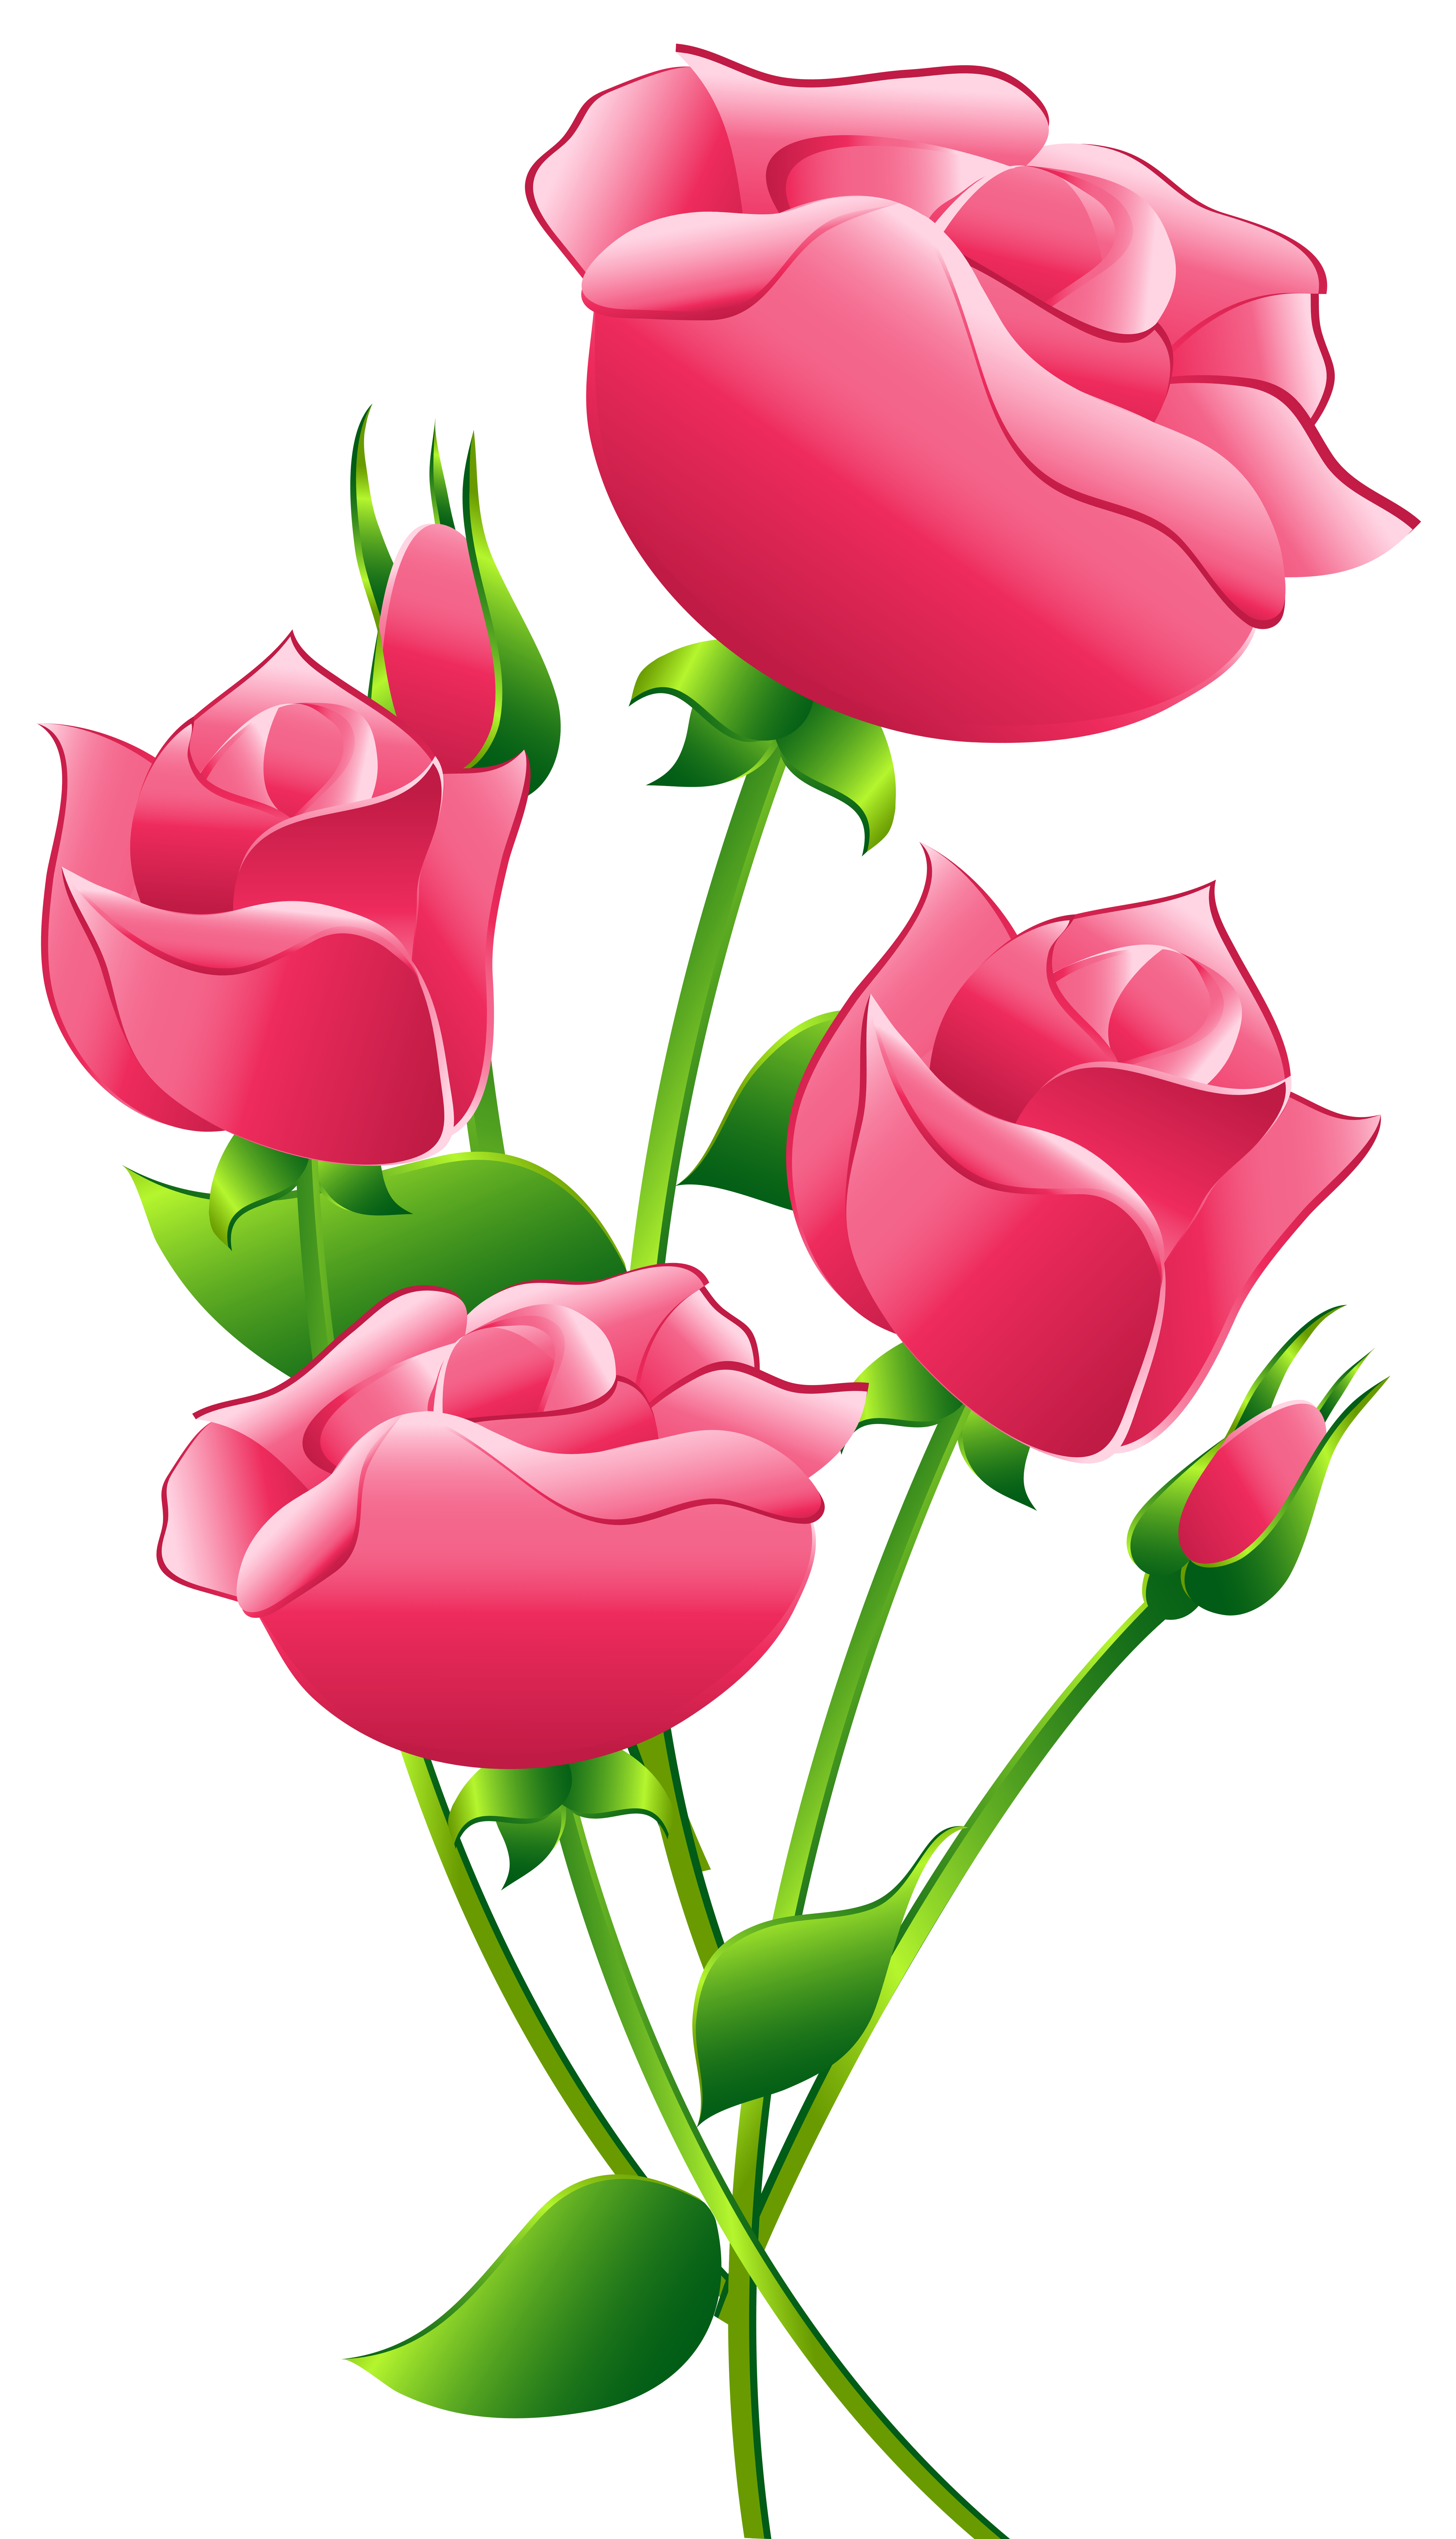 clipart images of red roses - photo #36